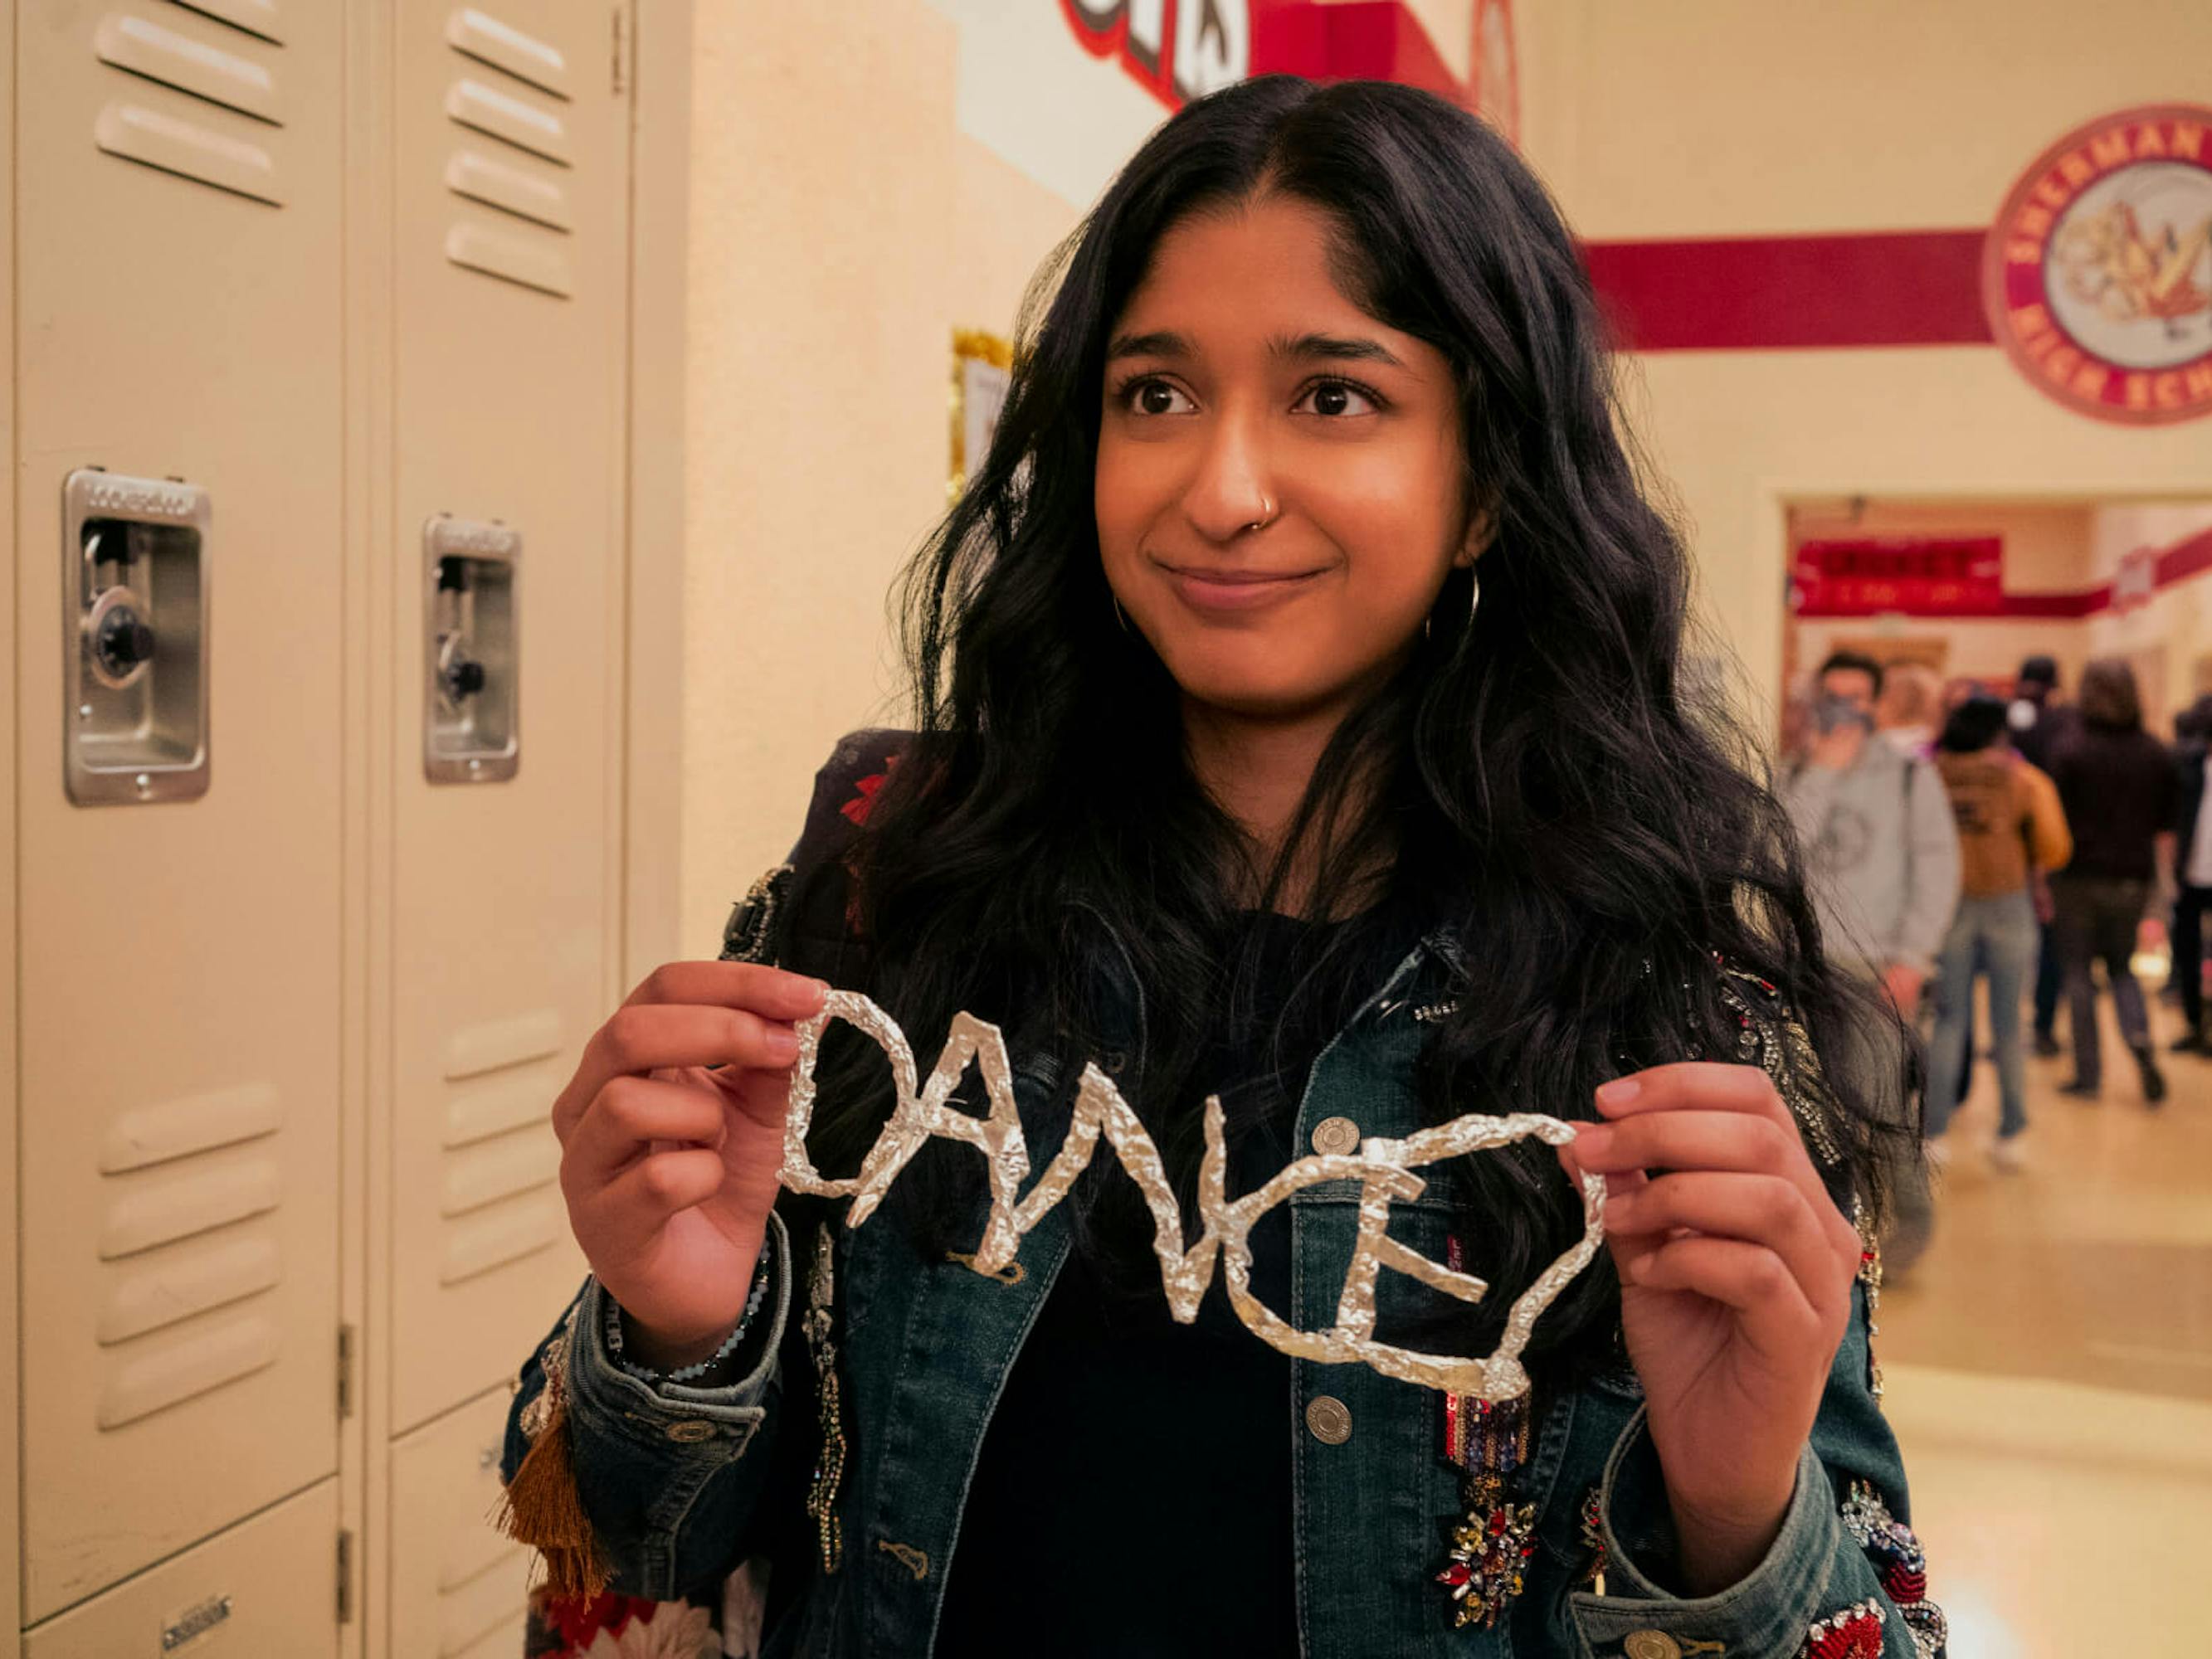 Devi Vishwakumar (Maitreyi Ramakrishnan) wears a jean jacket and holds up the word ‘dance’ made out of tinfoil and smiles sheepishly by the lockers. A classic high school scene!